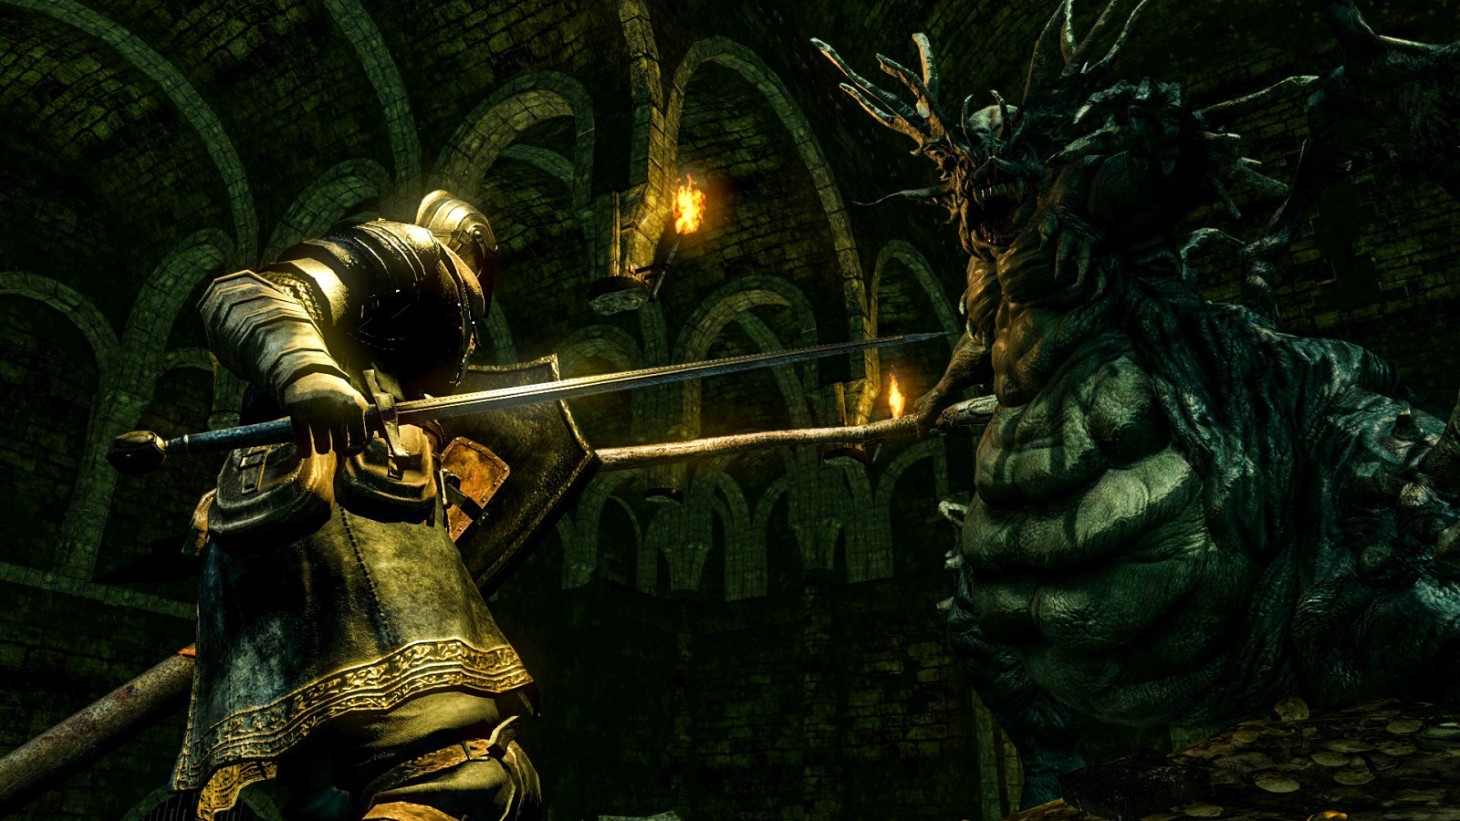 Dark Souls Just Celebrated Its Tenth Anniversary - Game Informer